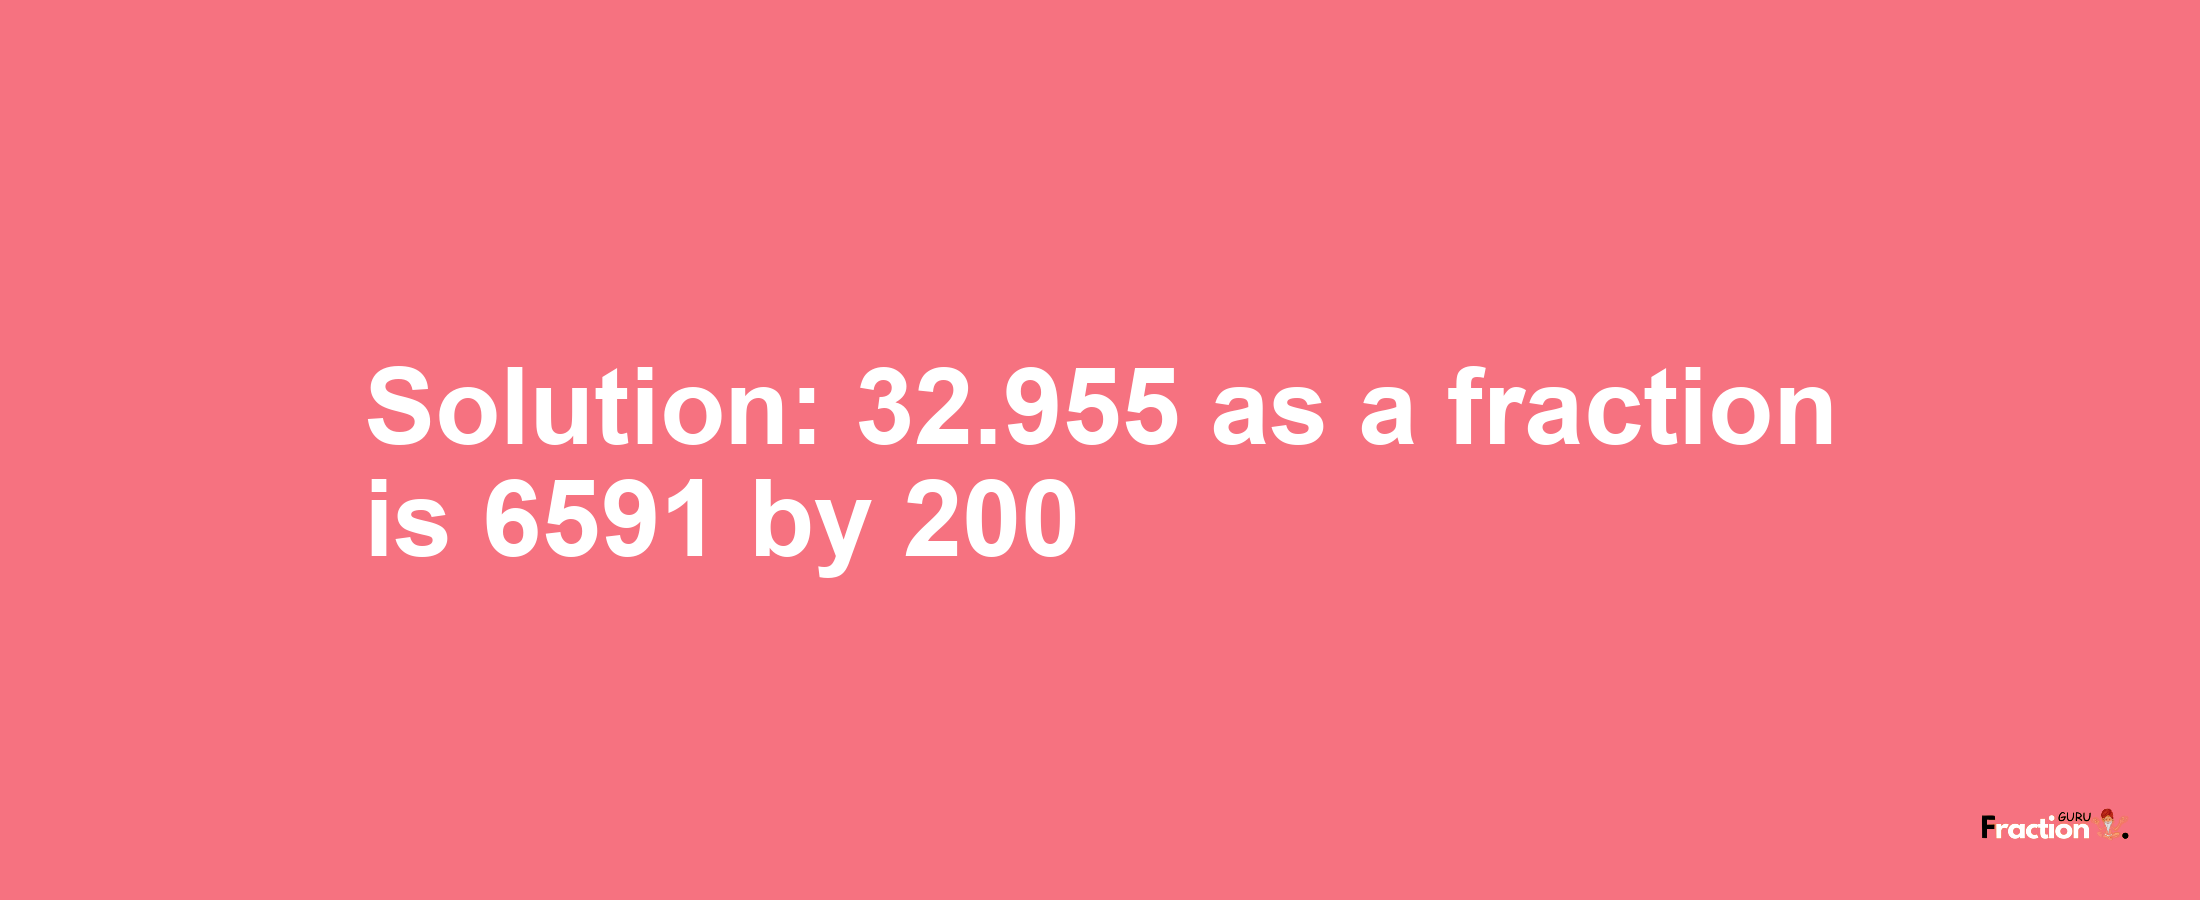 Solution:32.955 as a fraction is 6591/200